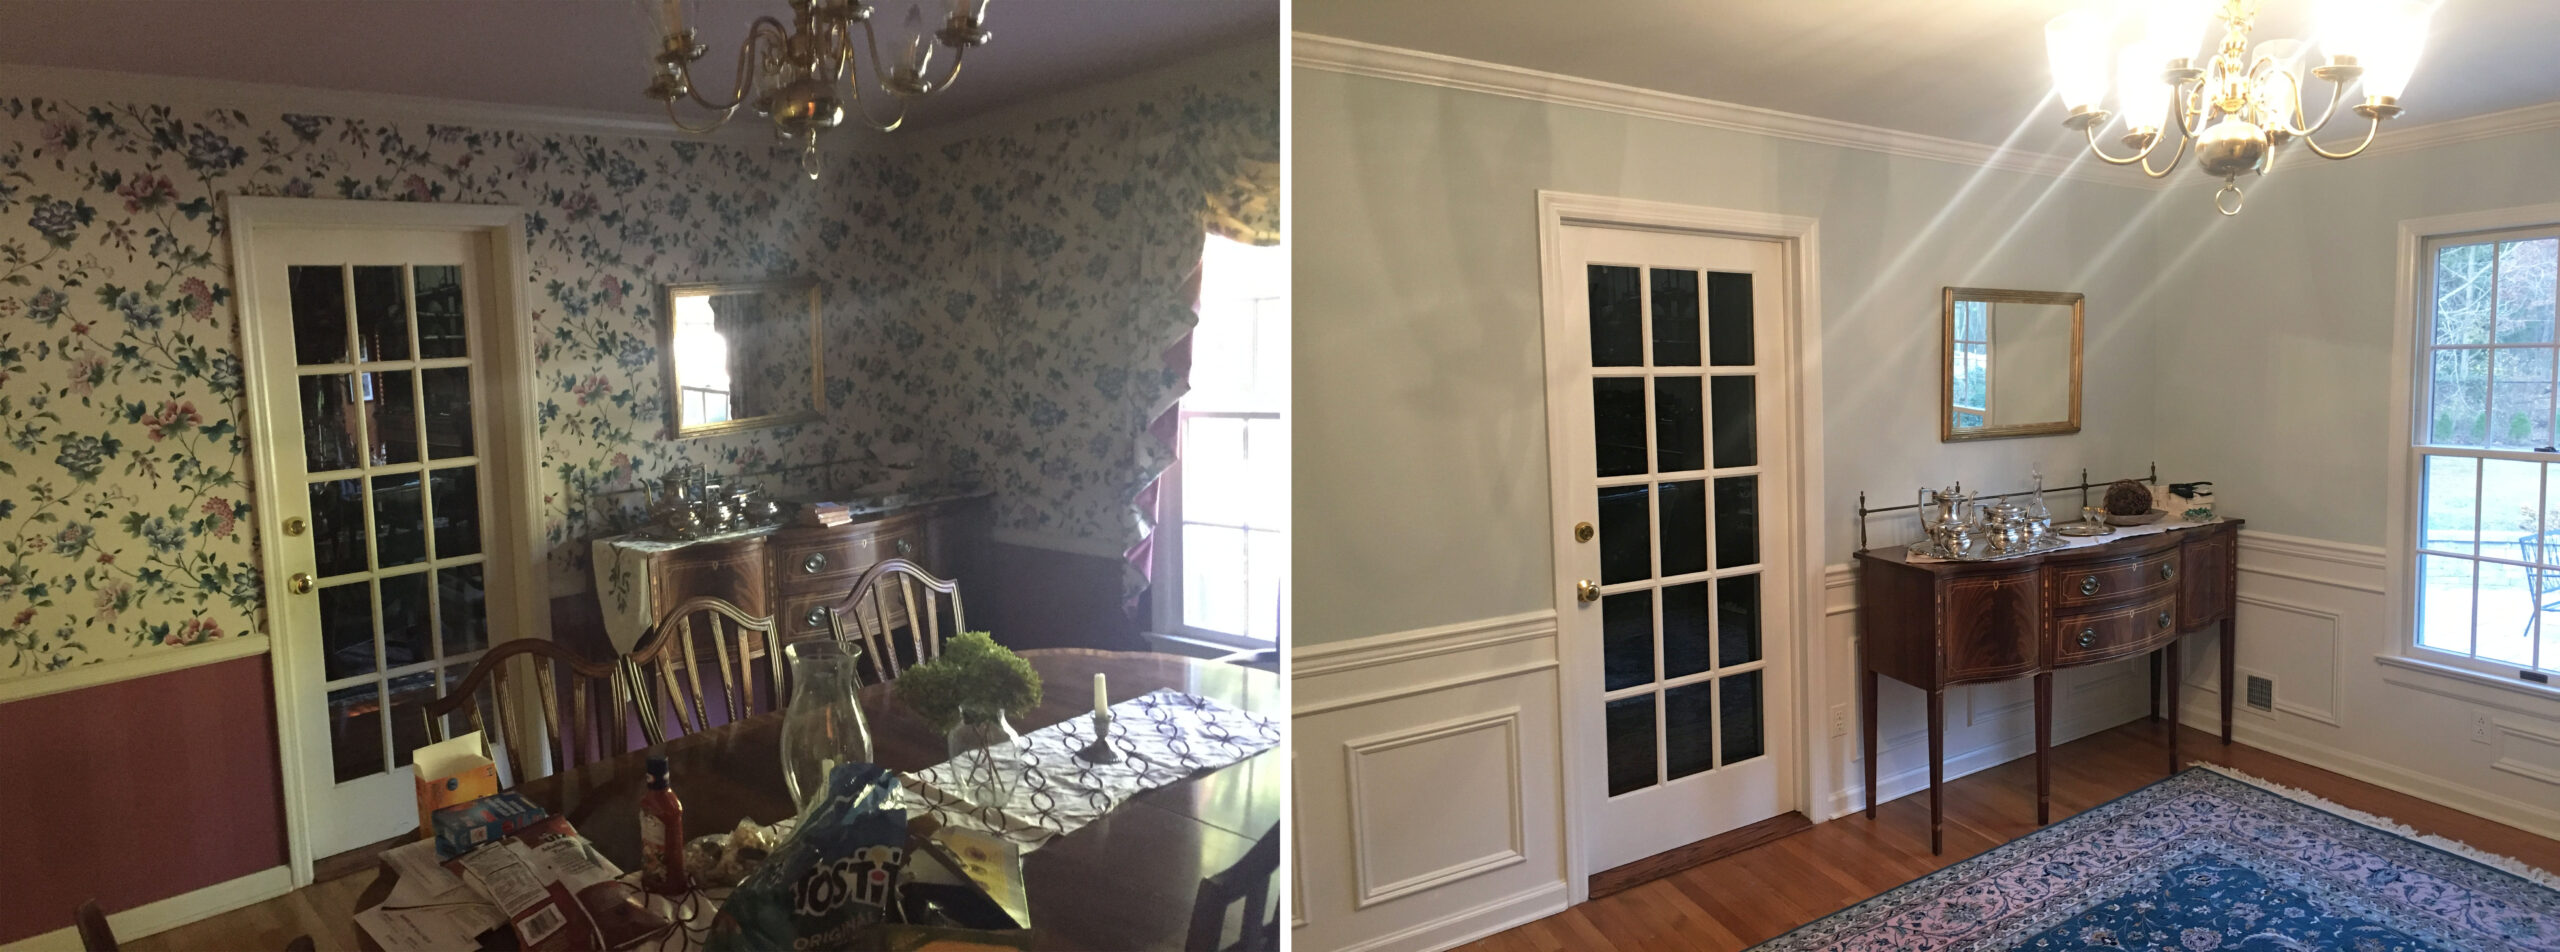 Interior Dining Room Painting Before and after